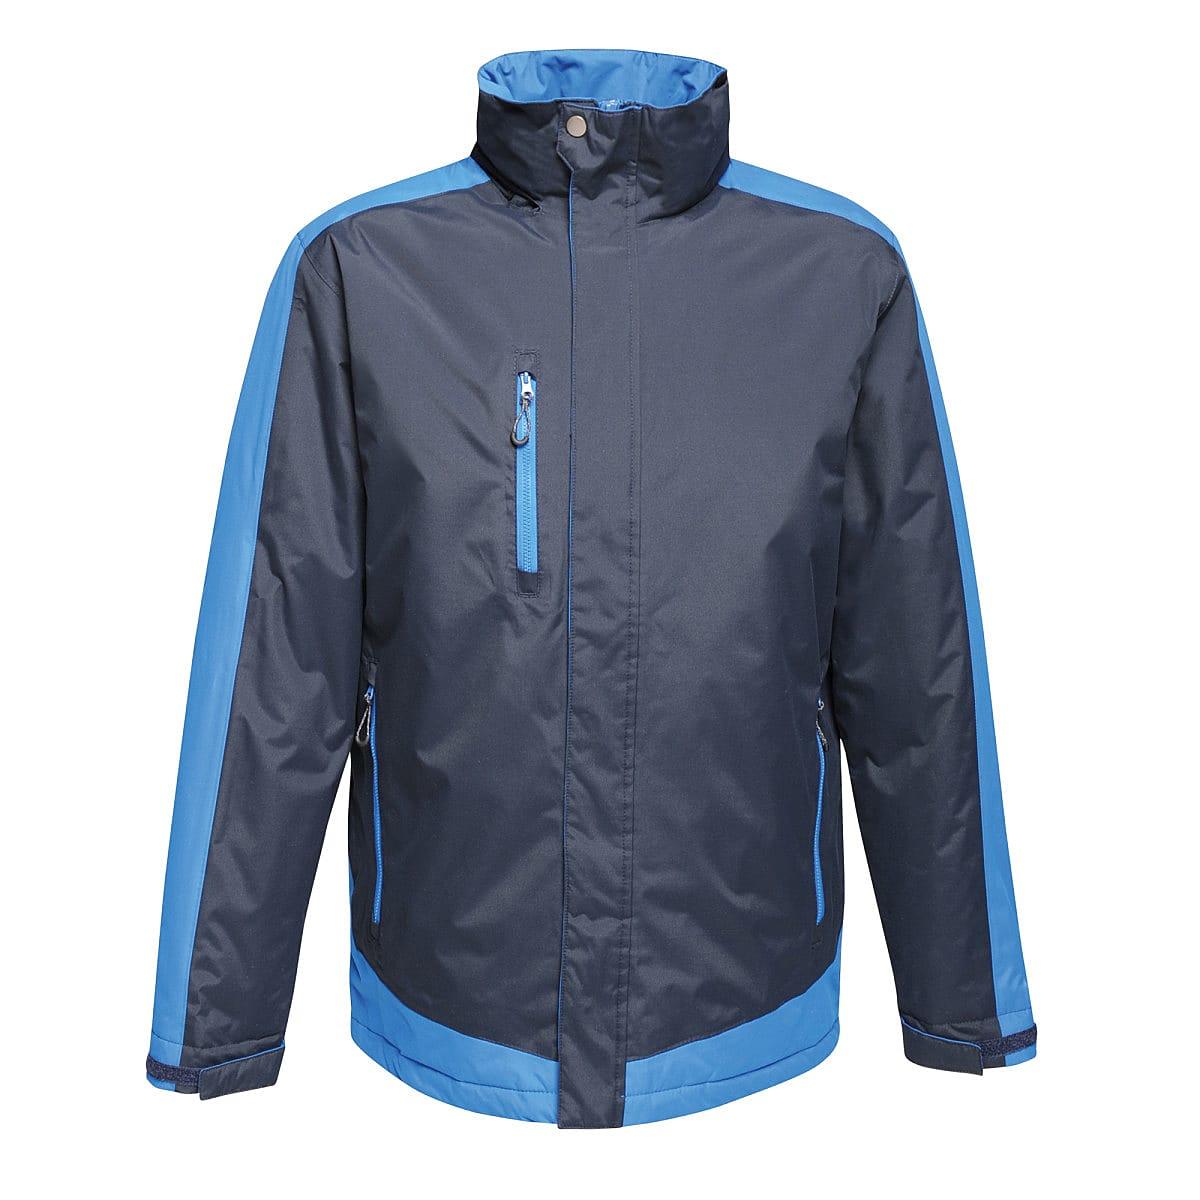 Regatta Mens Contrast Insulated Jacket in Navy / New Royal (Product Code: TRA312)